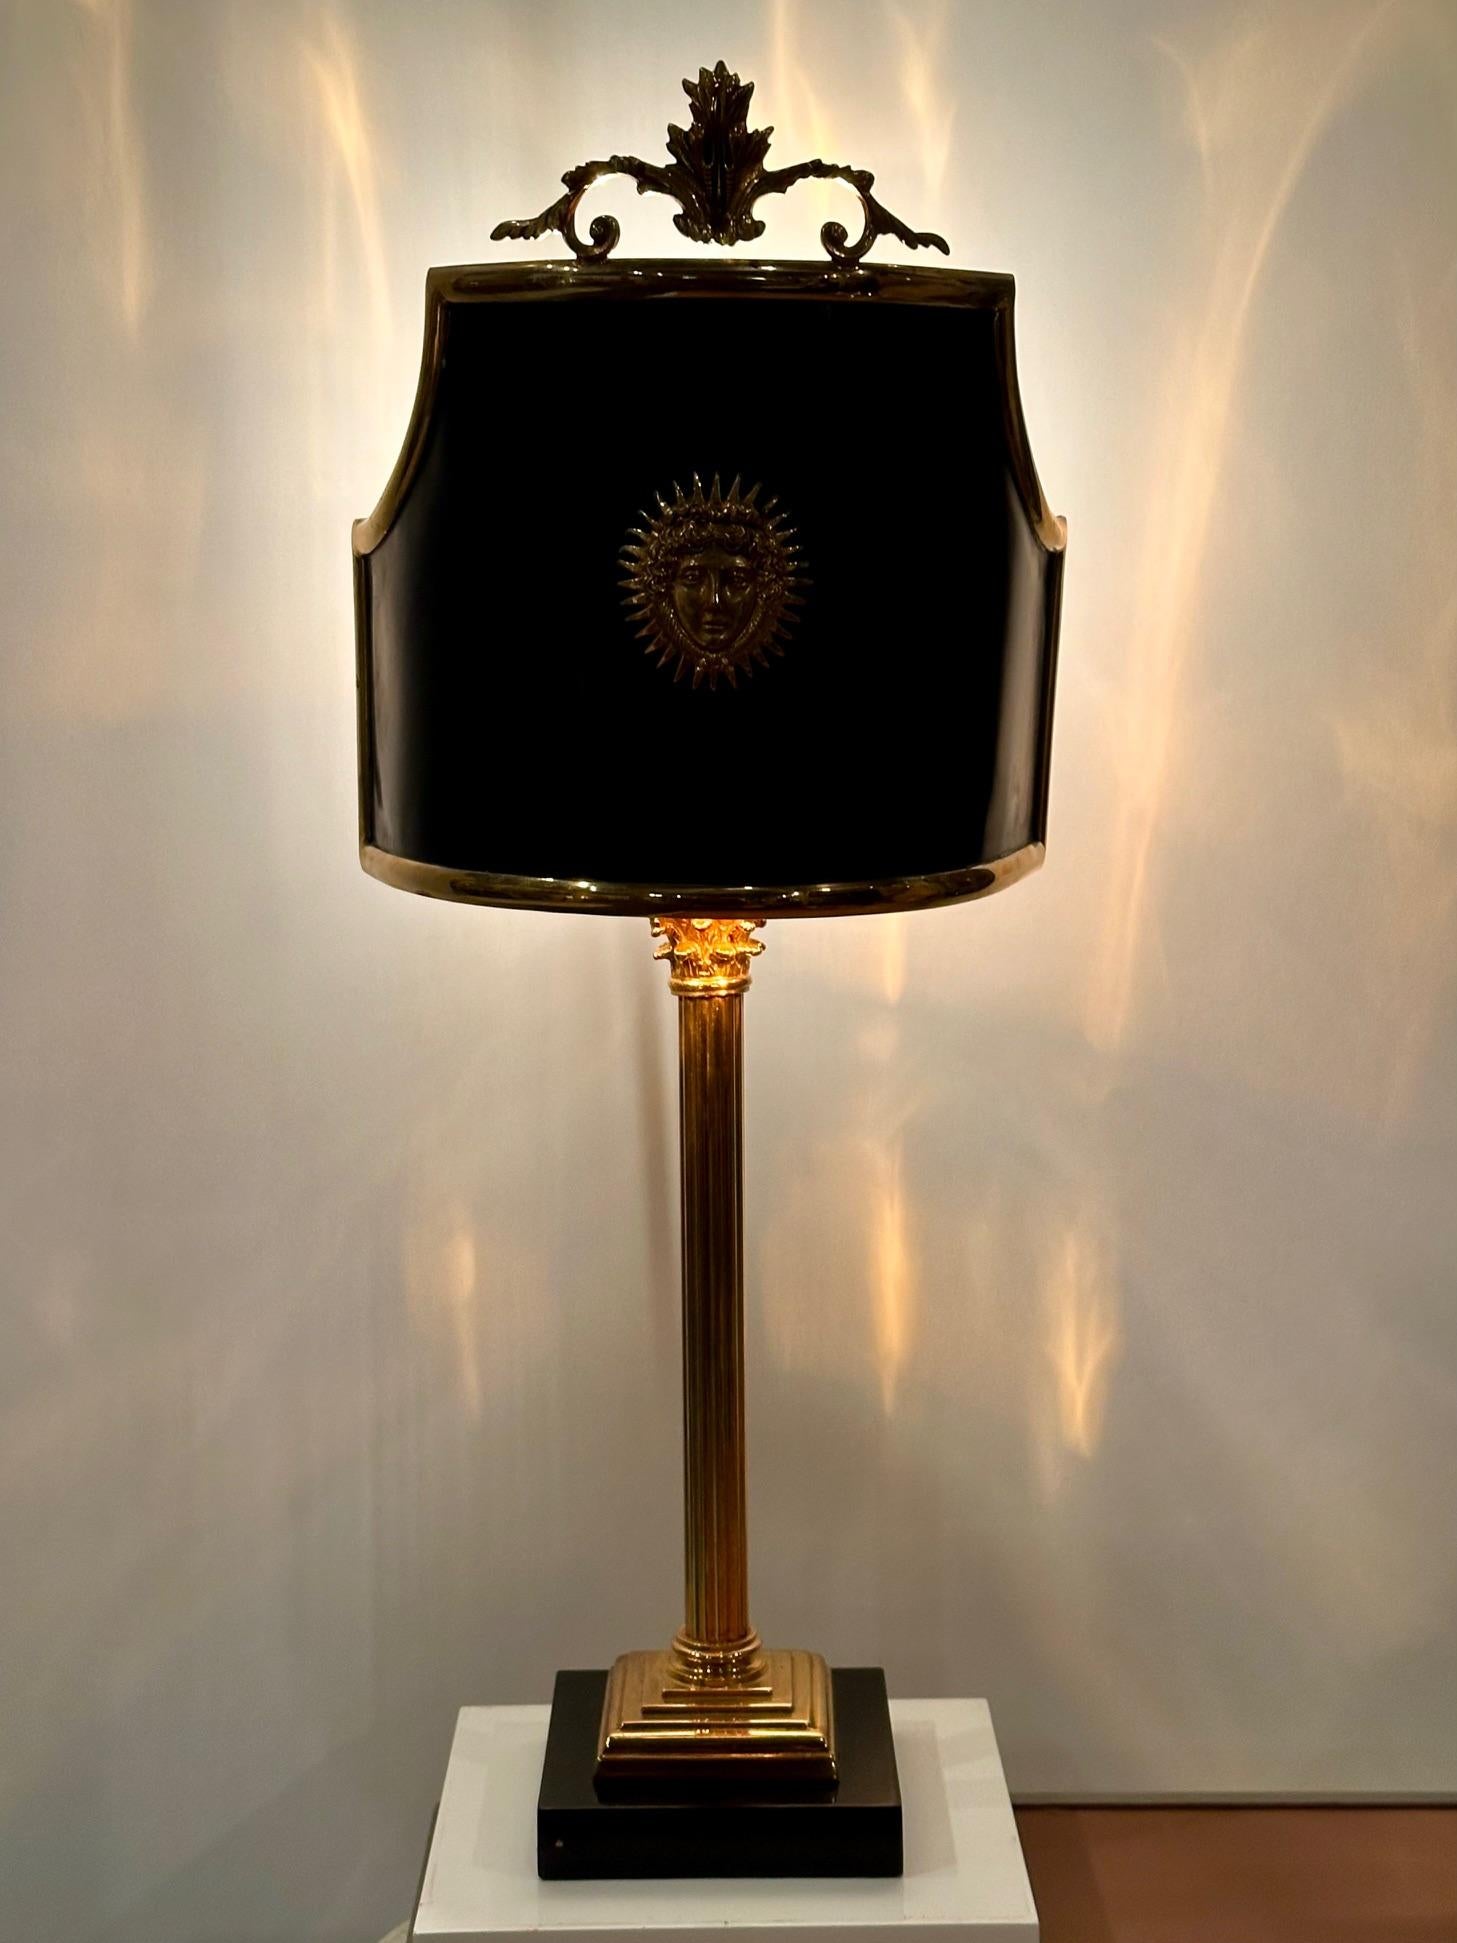 Stunning black and gold Maison Jansen gilt bronze and black ebonized table lamp having columnar form, fabulously shaped metal shade with starburst decoration on the front.  Oozes elegance.